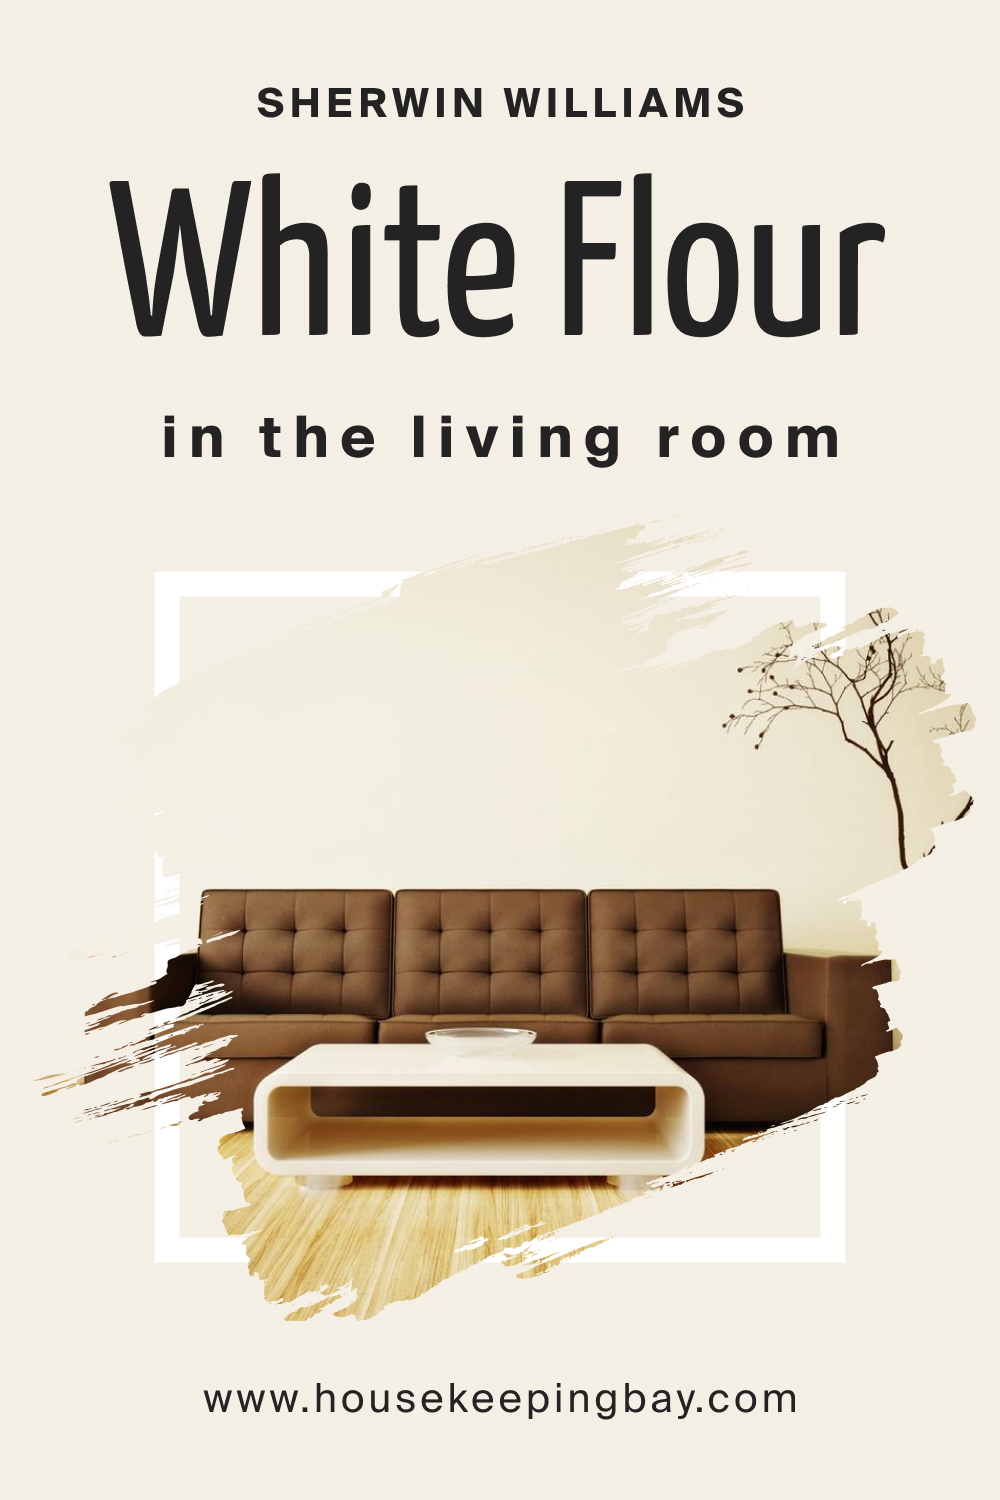 Sherwin Williams. SW White Flour In the Living Room